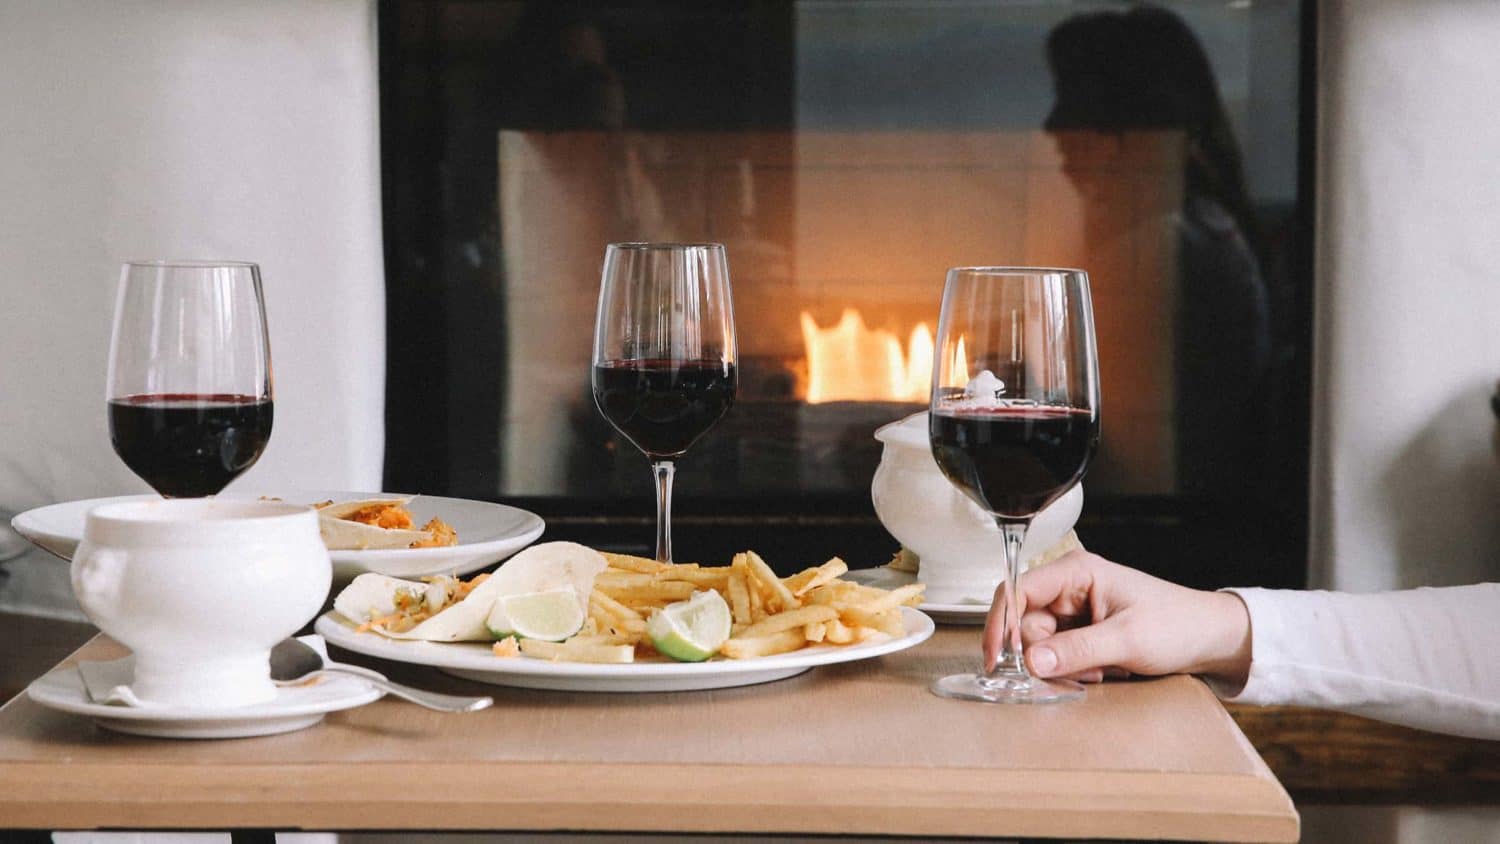 small table in front of fireplace, with entrees and glasses of wine